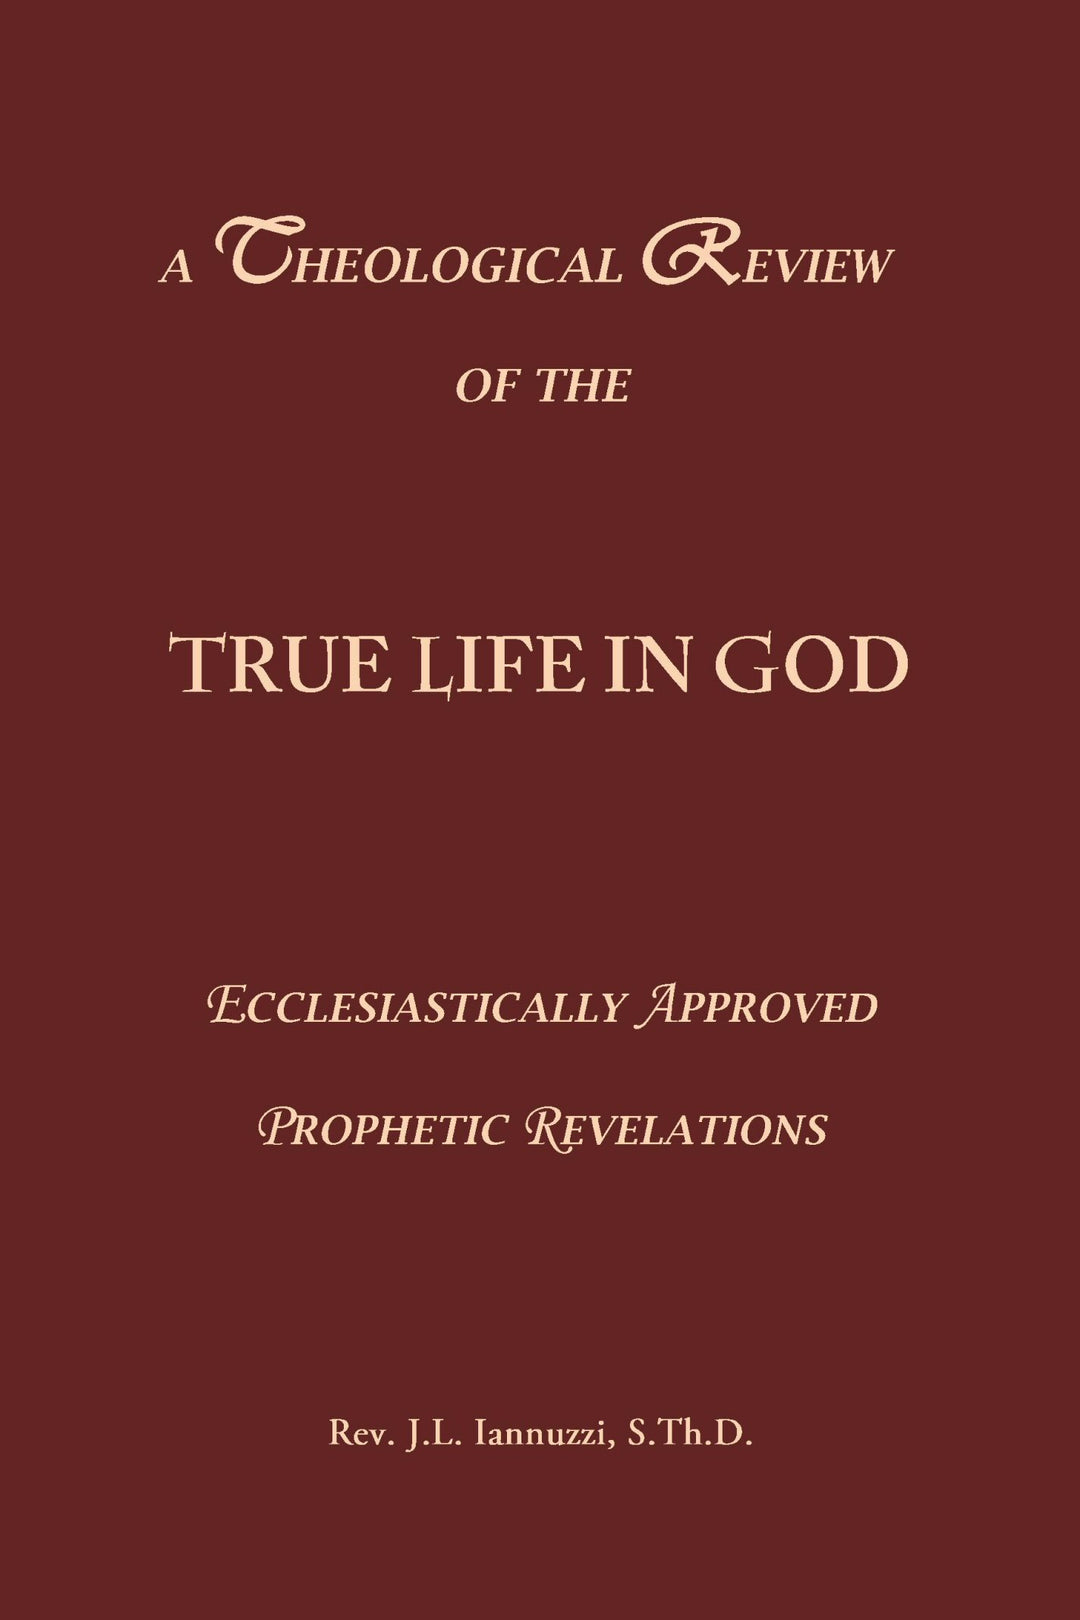 The Theological Review of The True Life in God Ecclesiastically Approved Prophetic Revelations